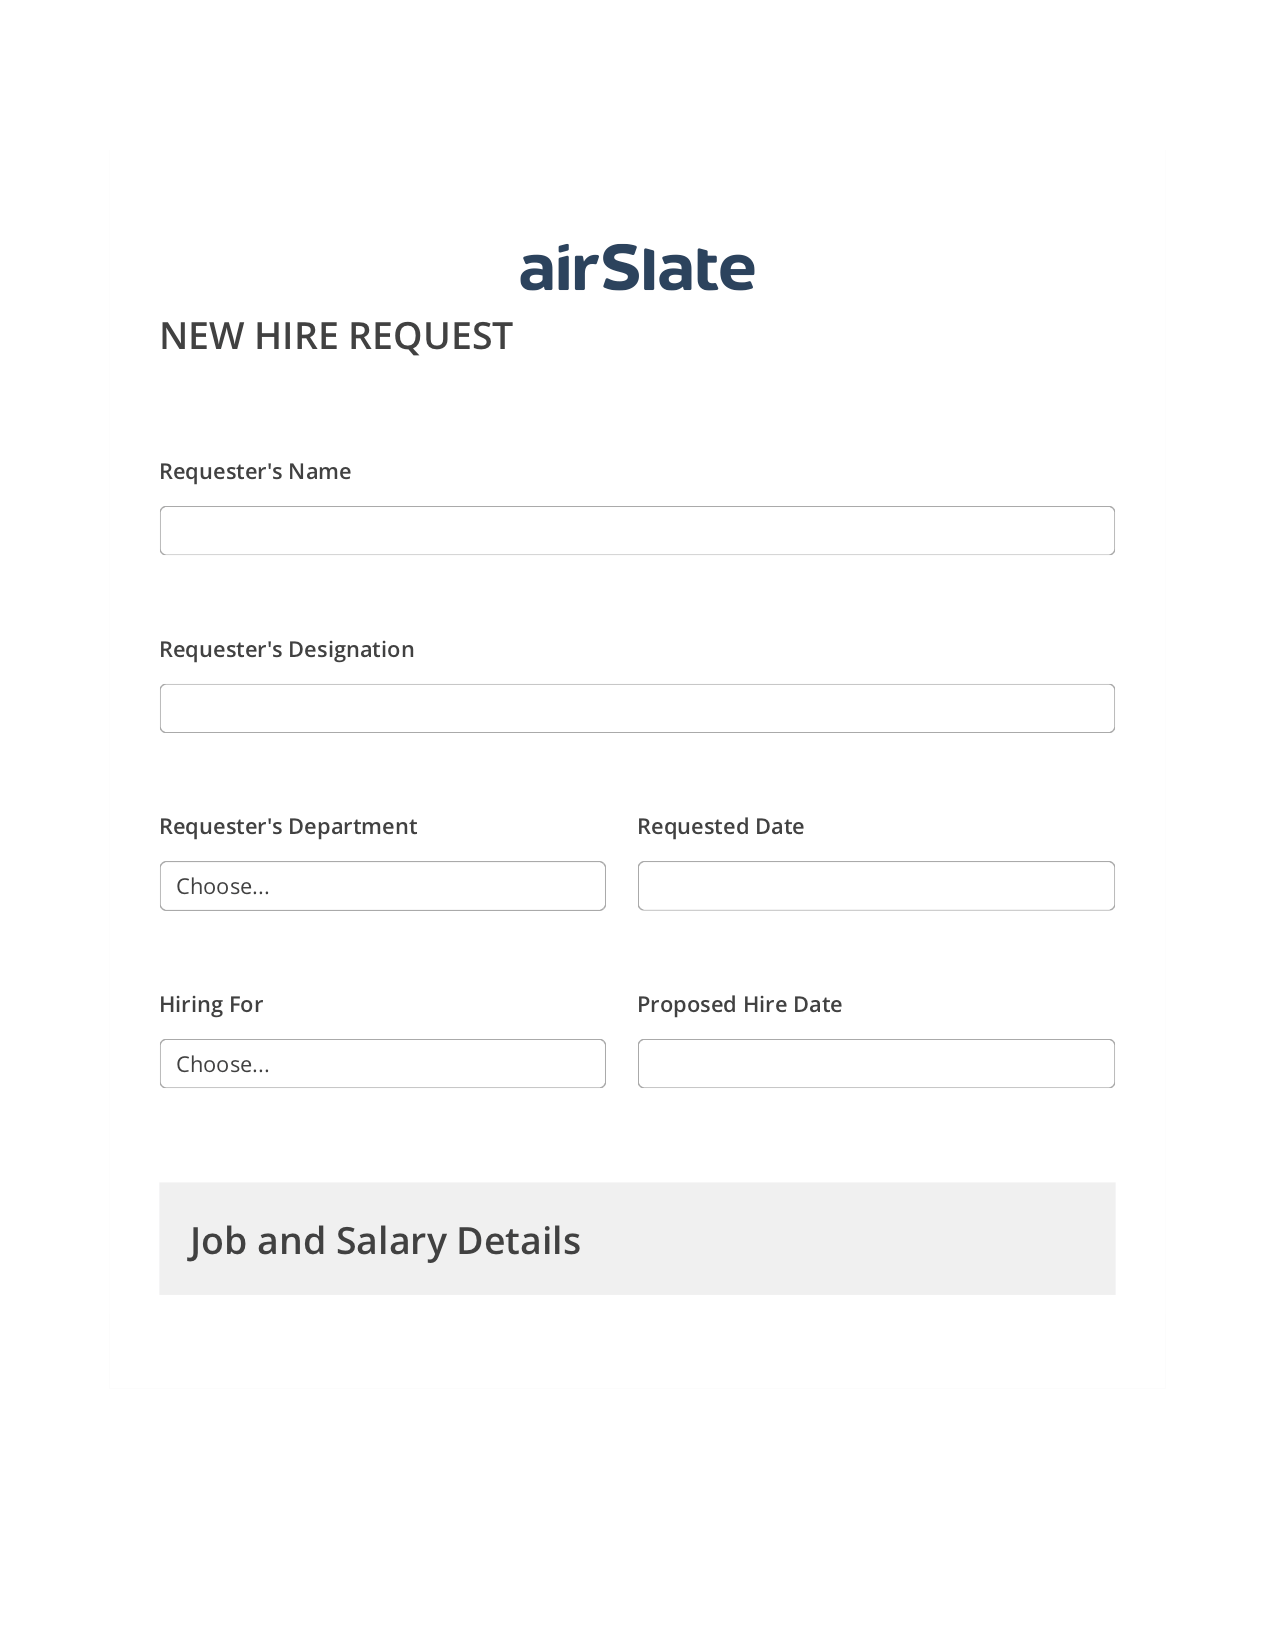 Hiring Request Workflow Pre-fill from Office 365 Excel Bot, System Bot - Create a Slate in another Flow, Export to WebMerge Bot